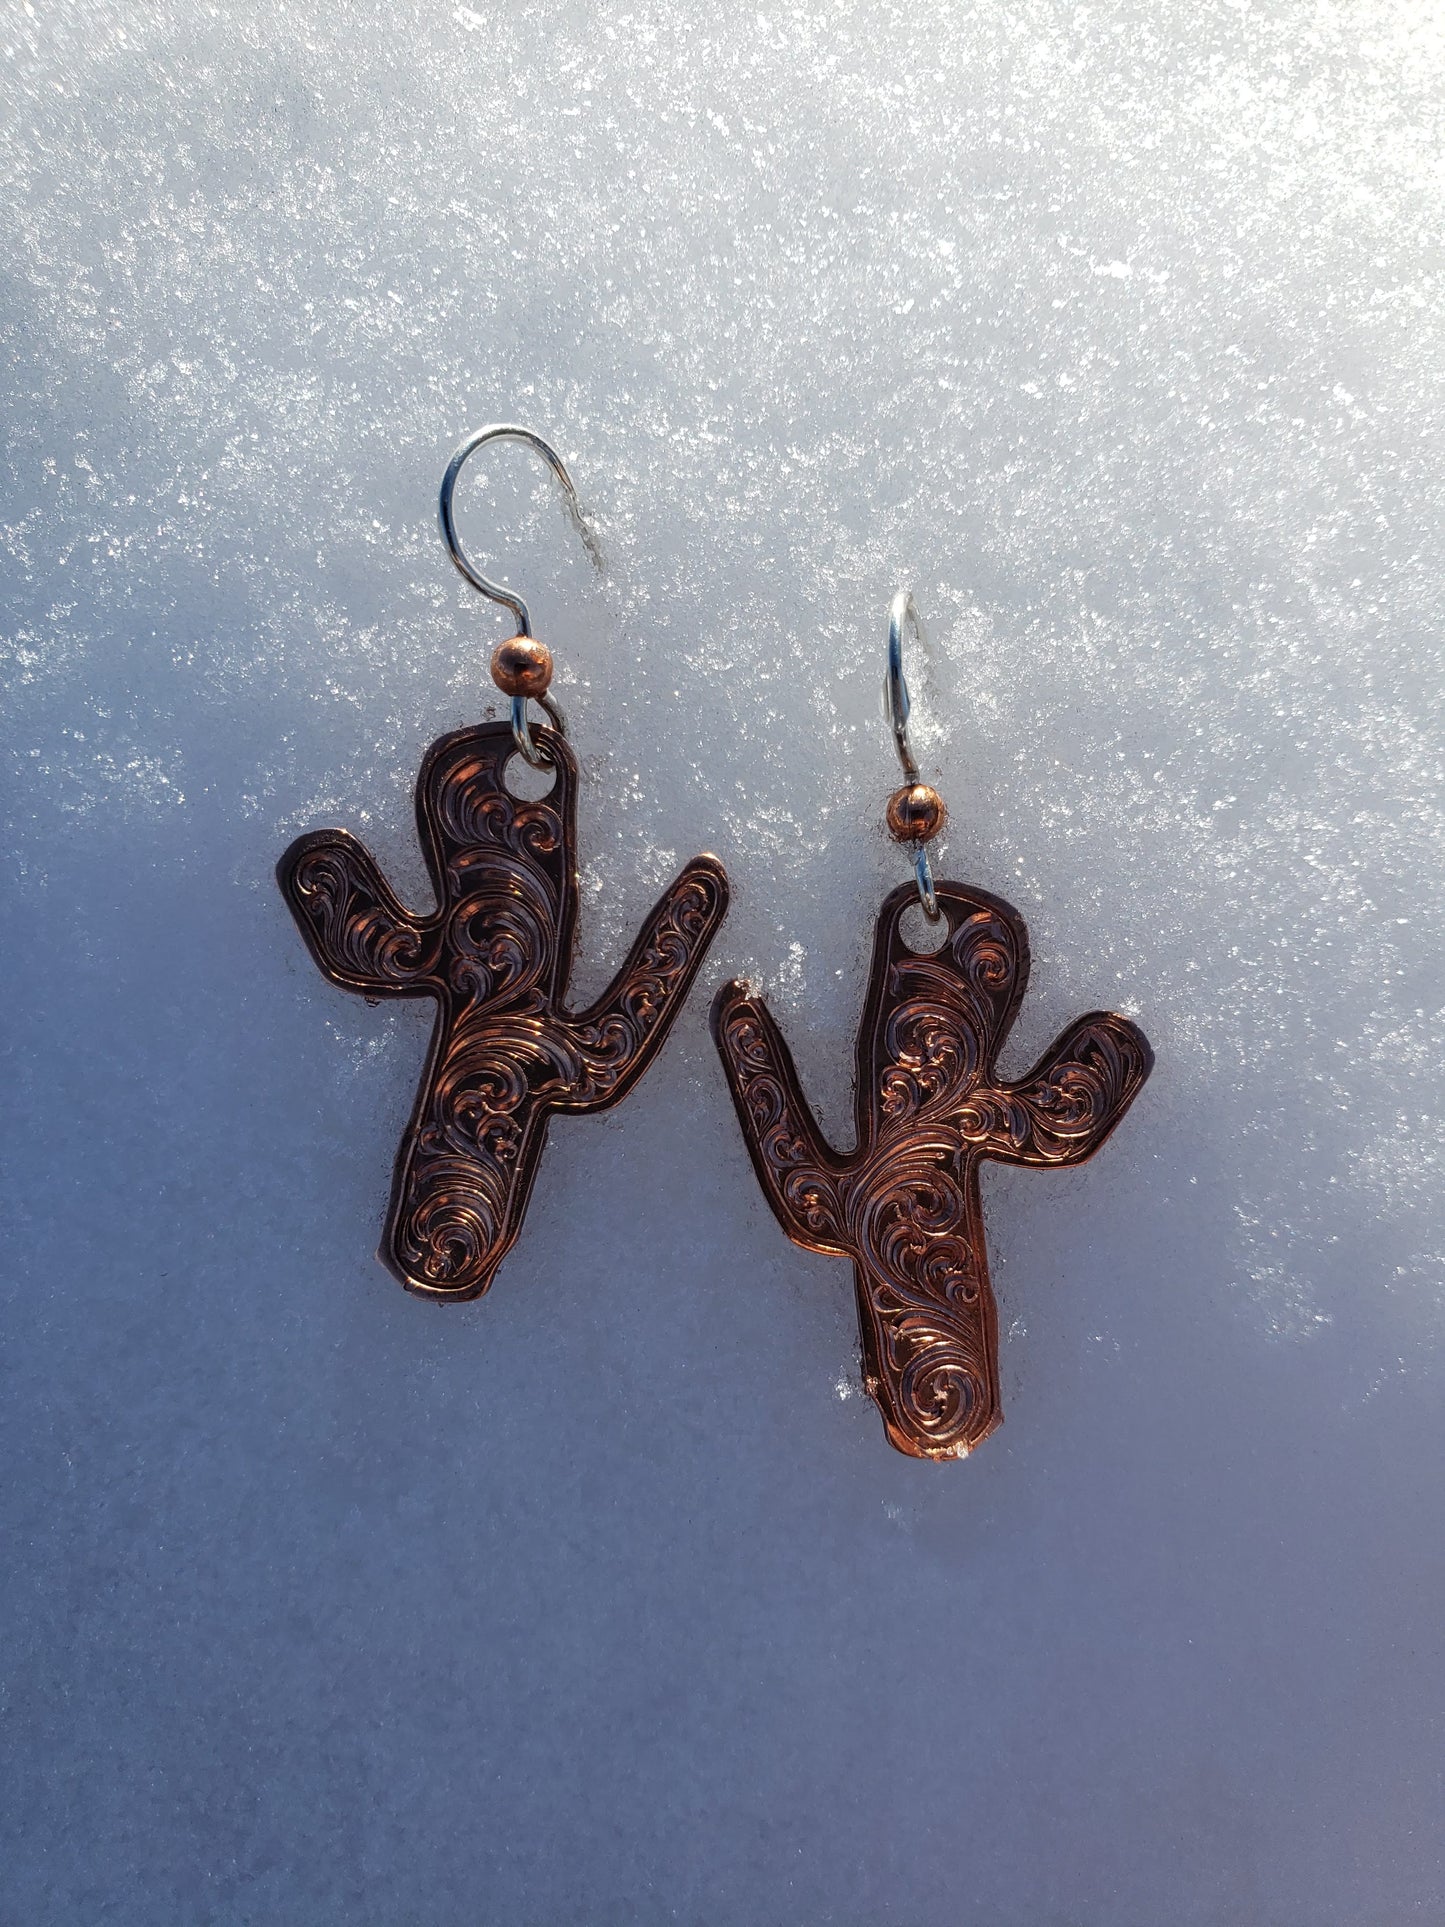 Cactus inspired Copper Engraved Hand Engraved Earrings, Metal Fashion, Western Bright Cut,  Gifts for Her